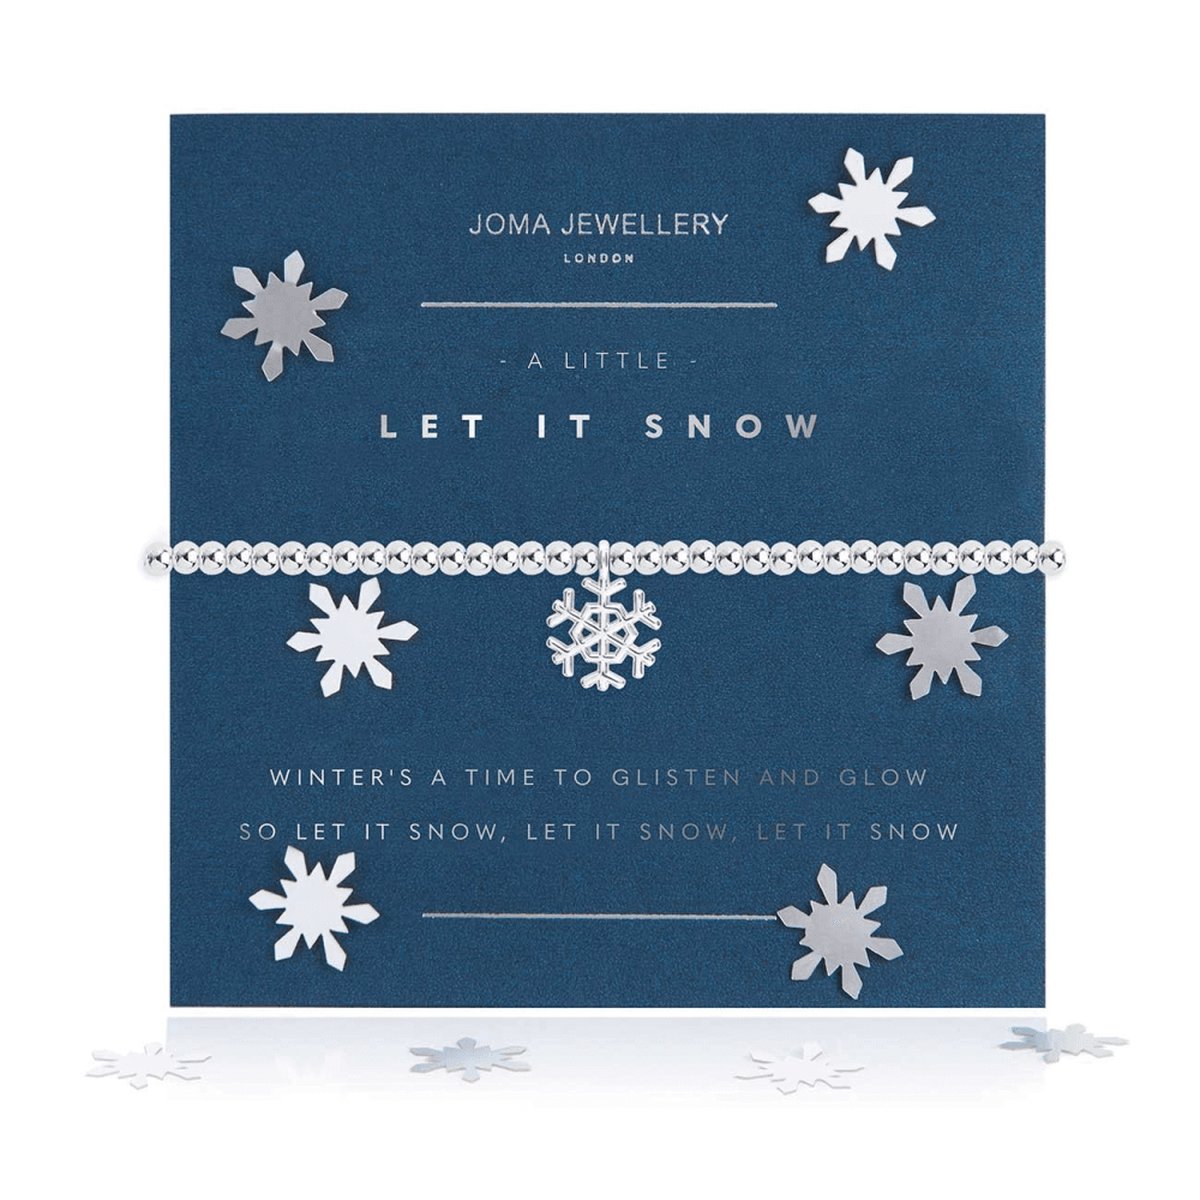 Joma Jewellery - A Little - Let it Snow - Armband